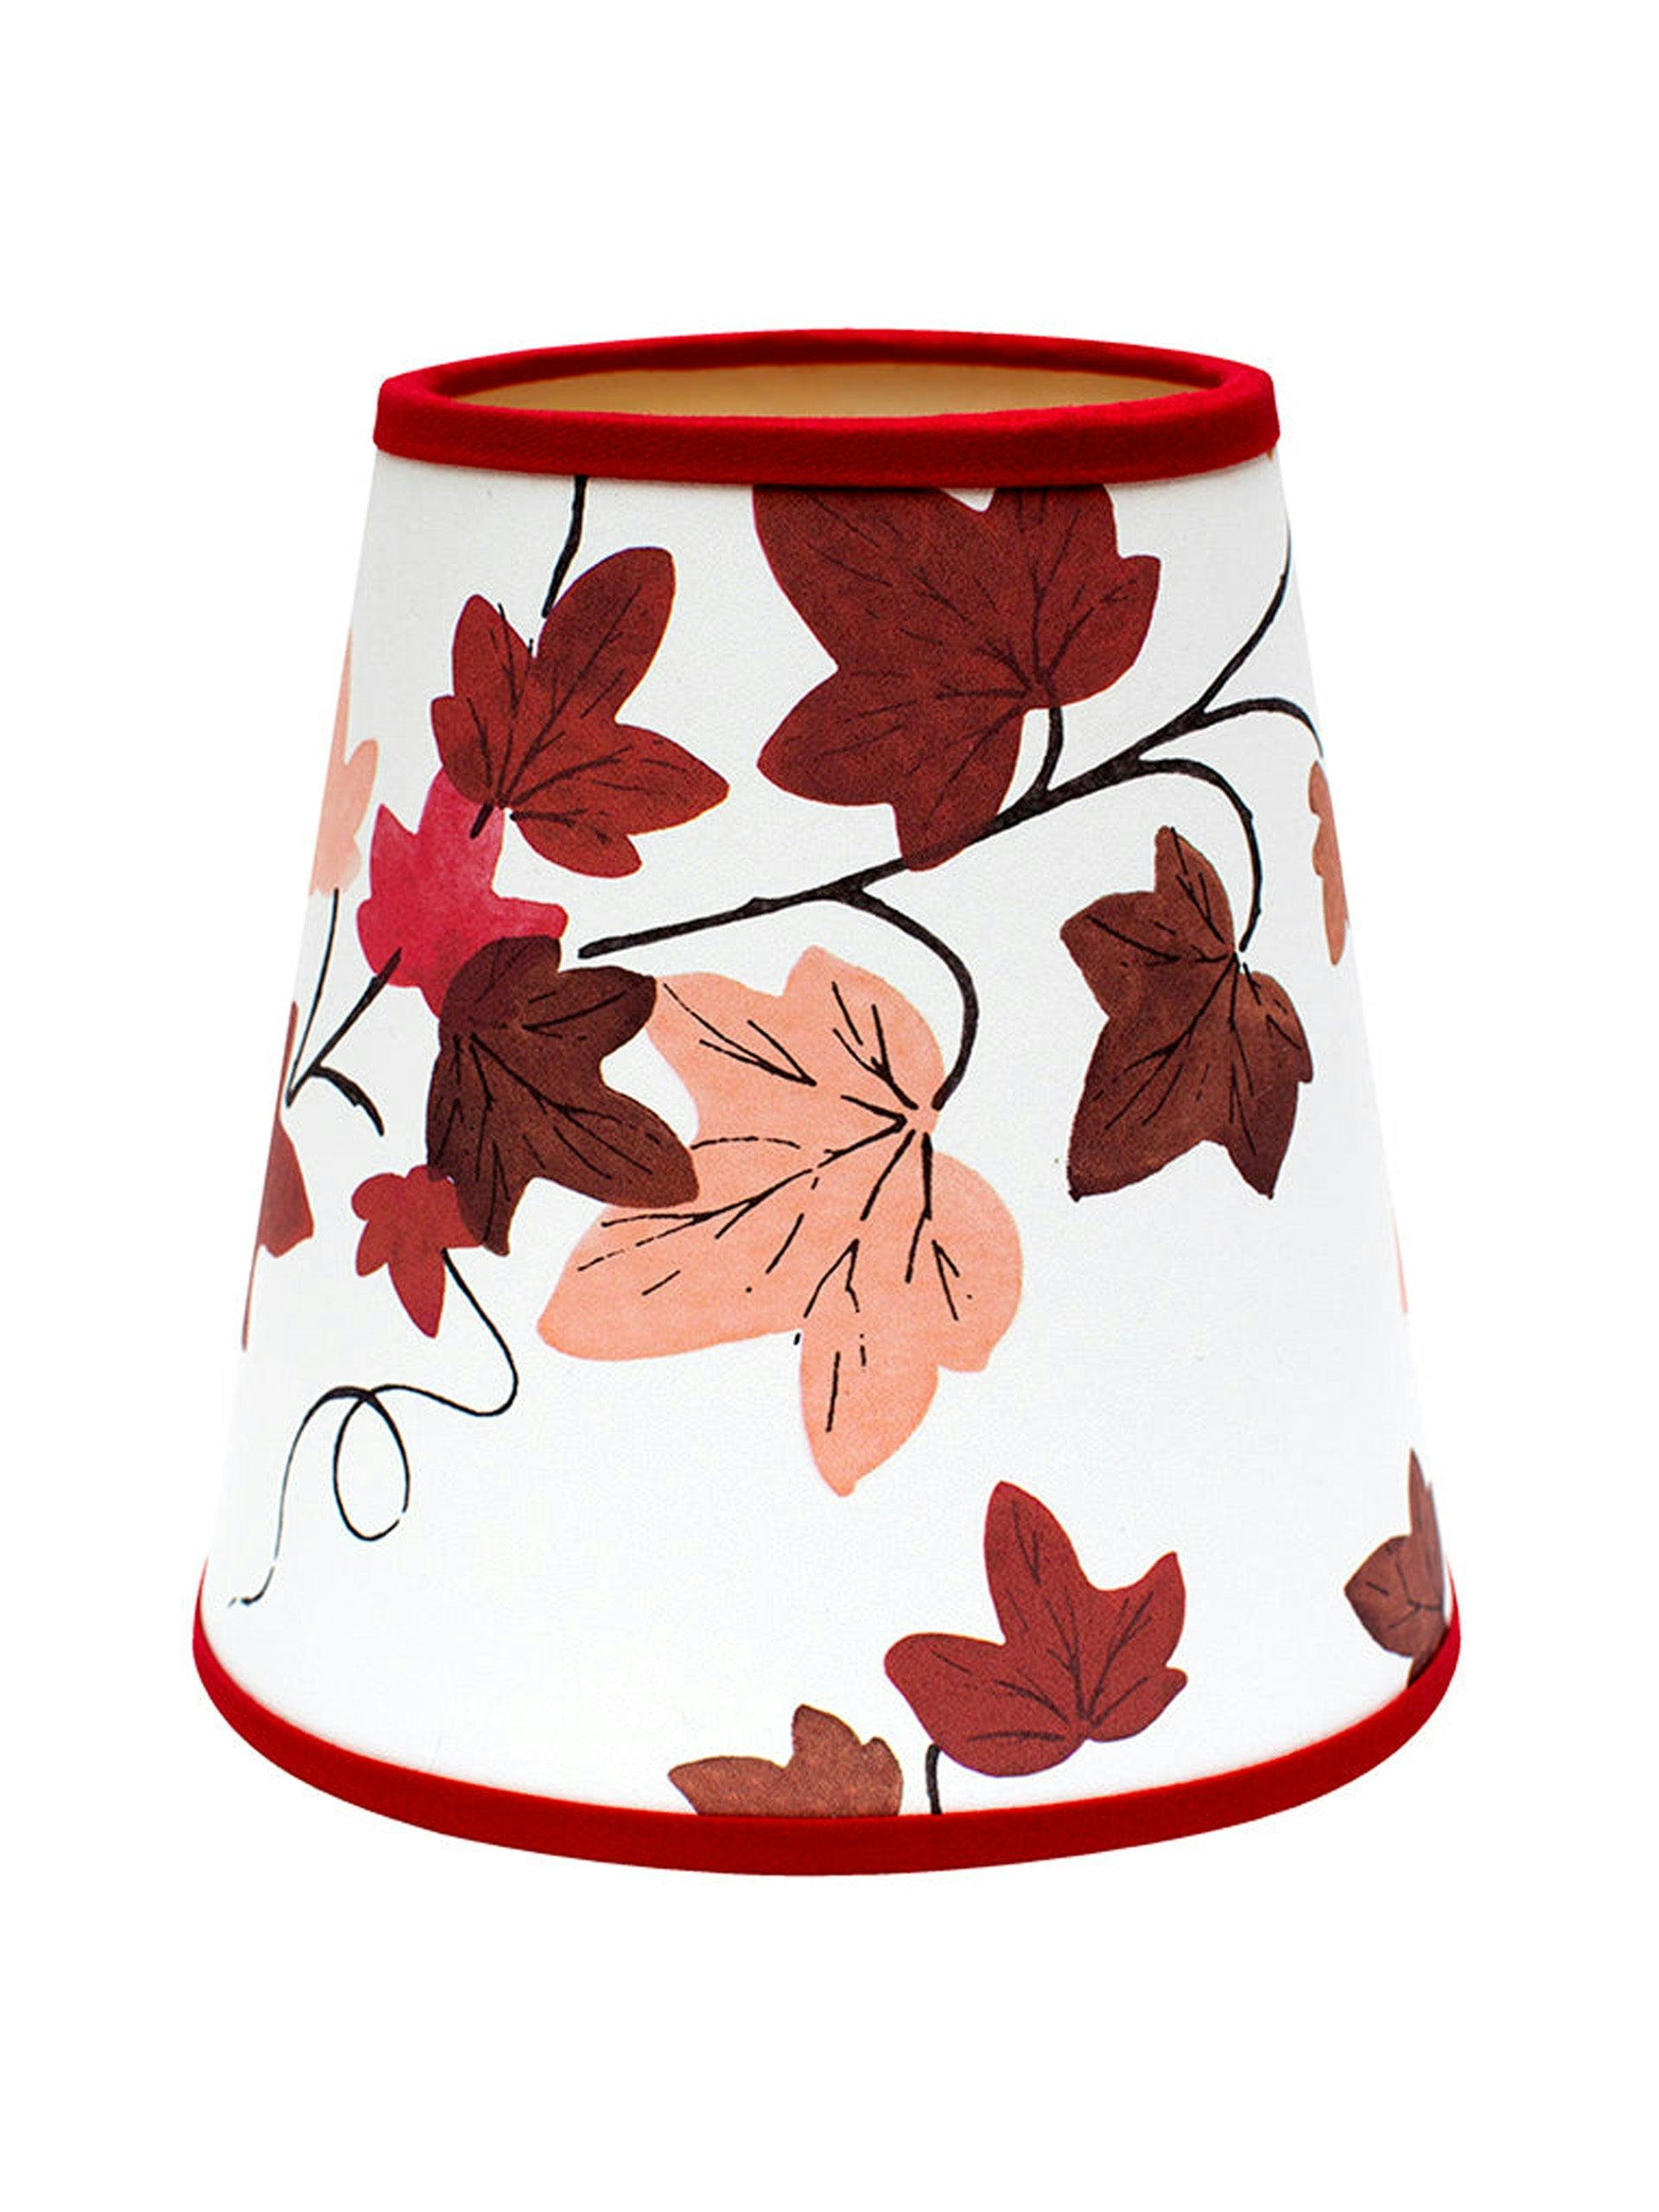 Trailing Ivy in Red lampshade